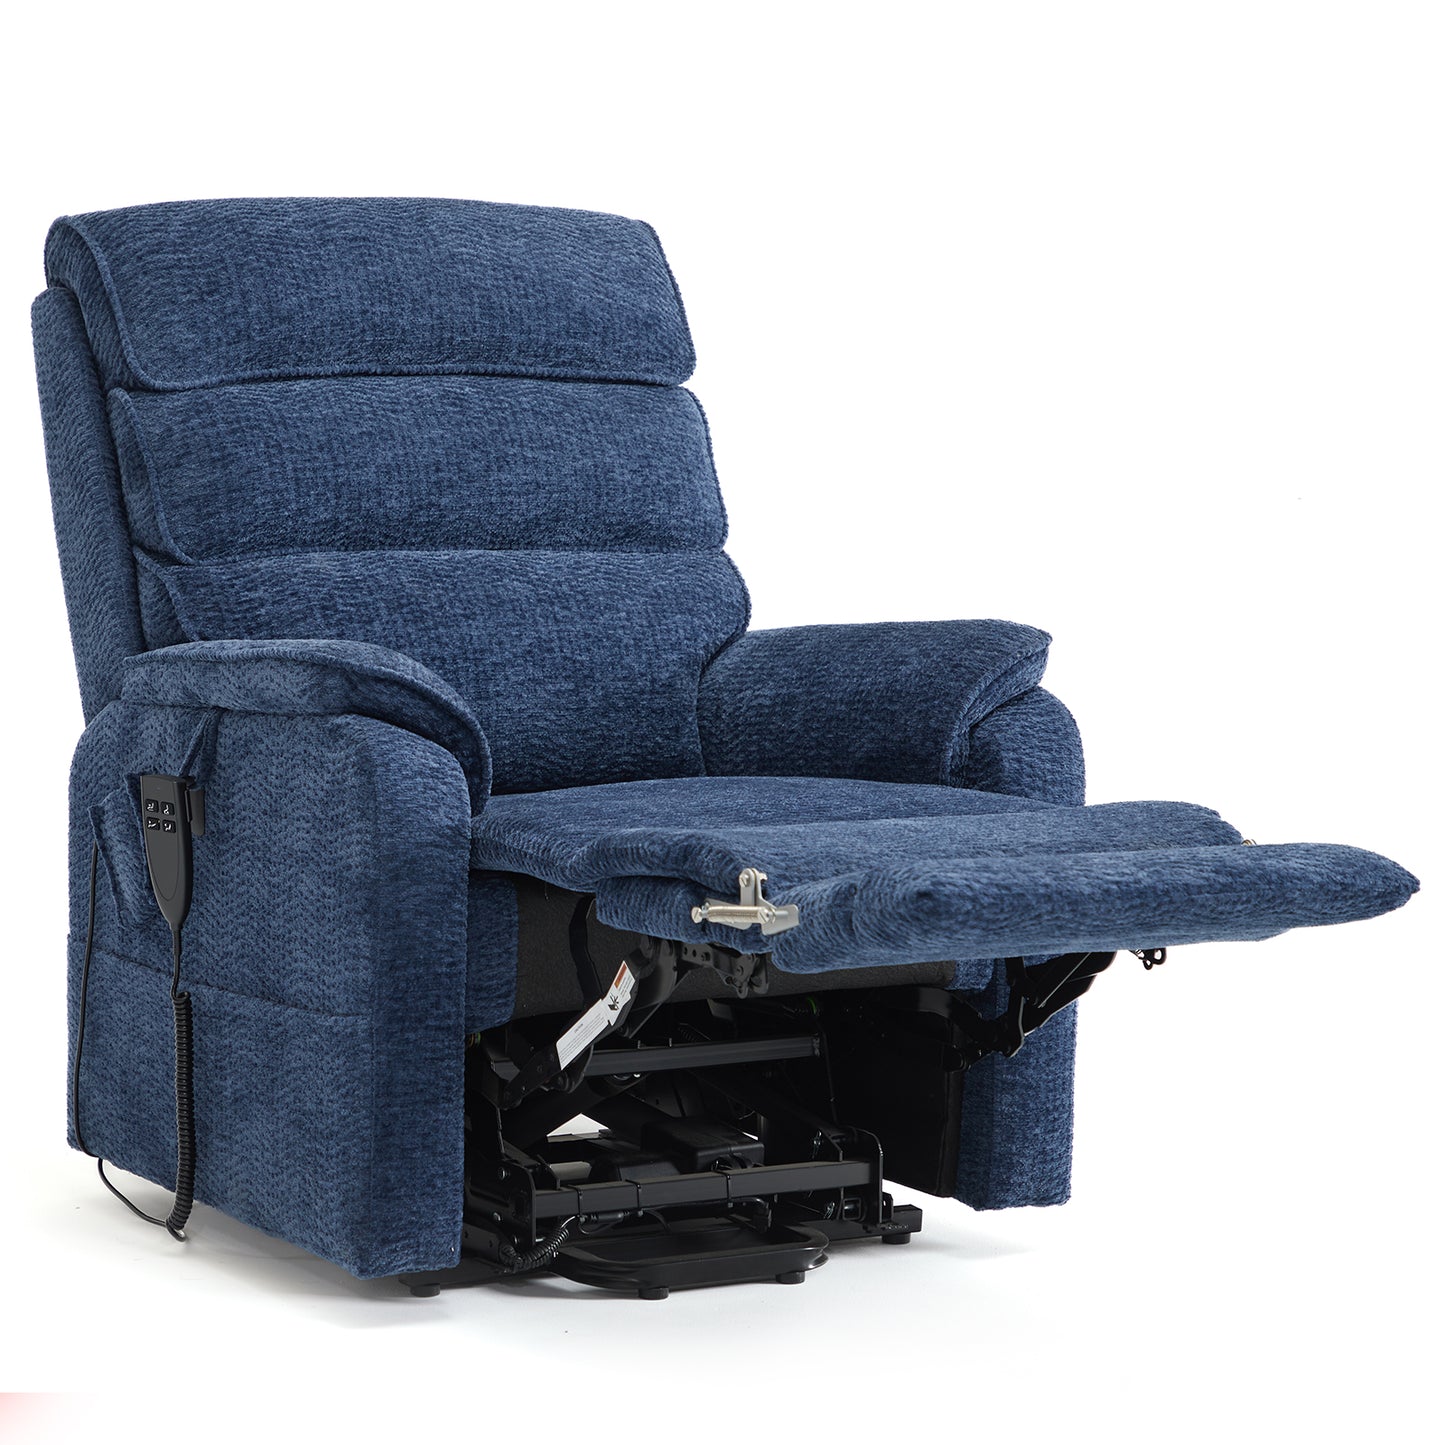 Best Recliner For Tall Woman With Heat And Massage